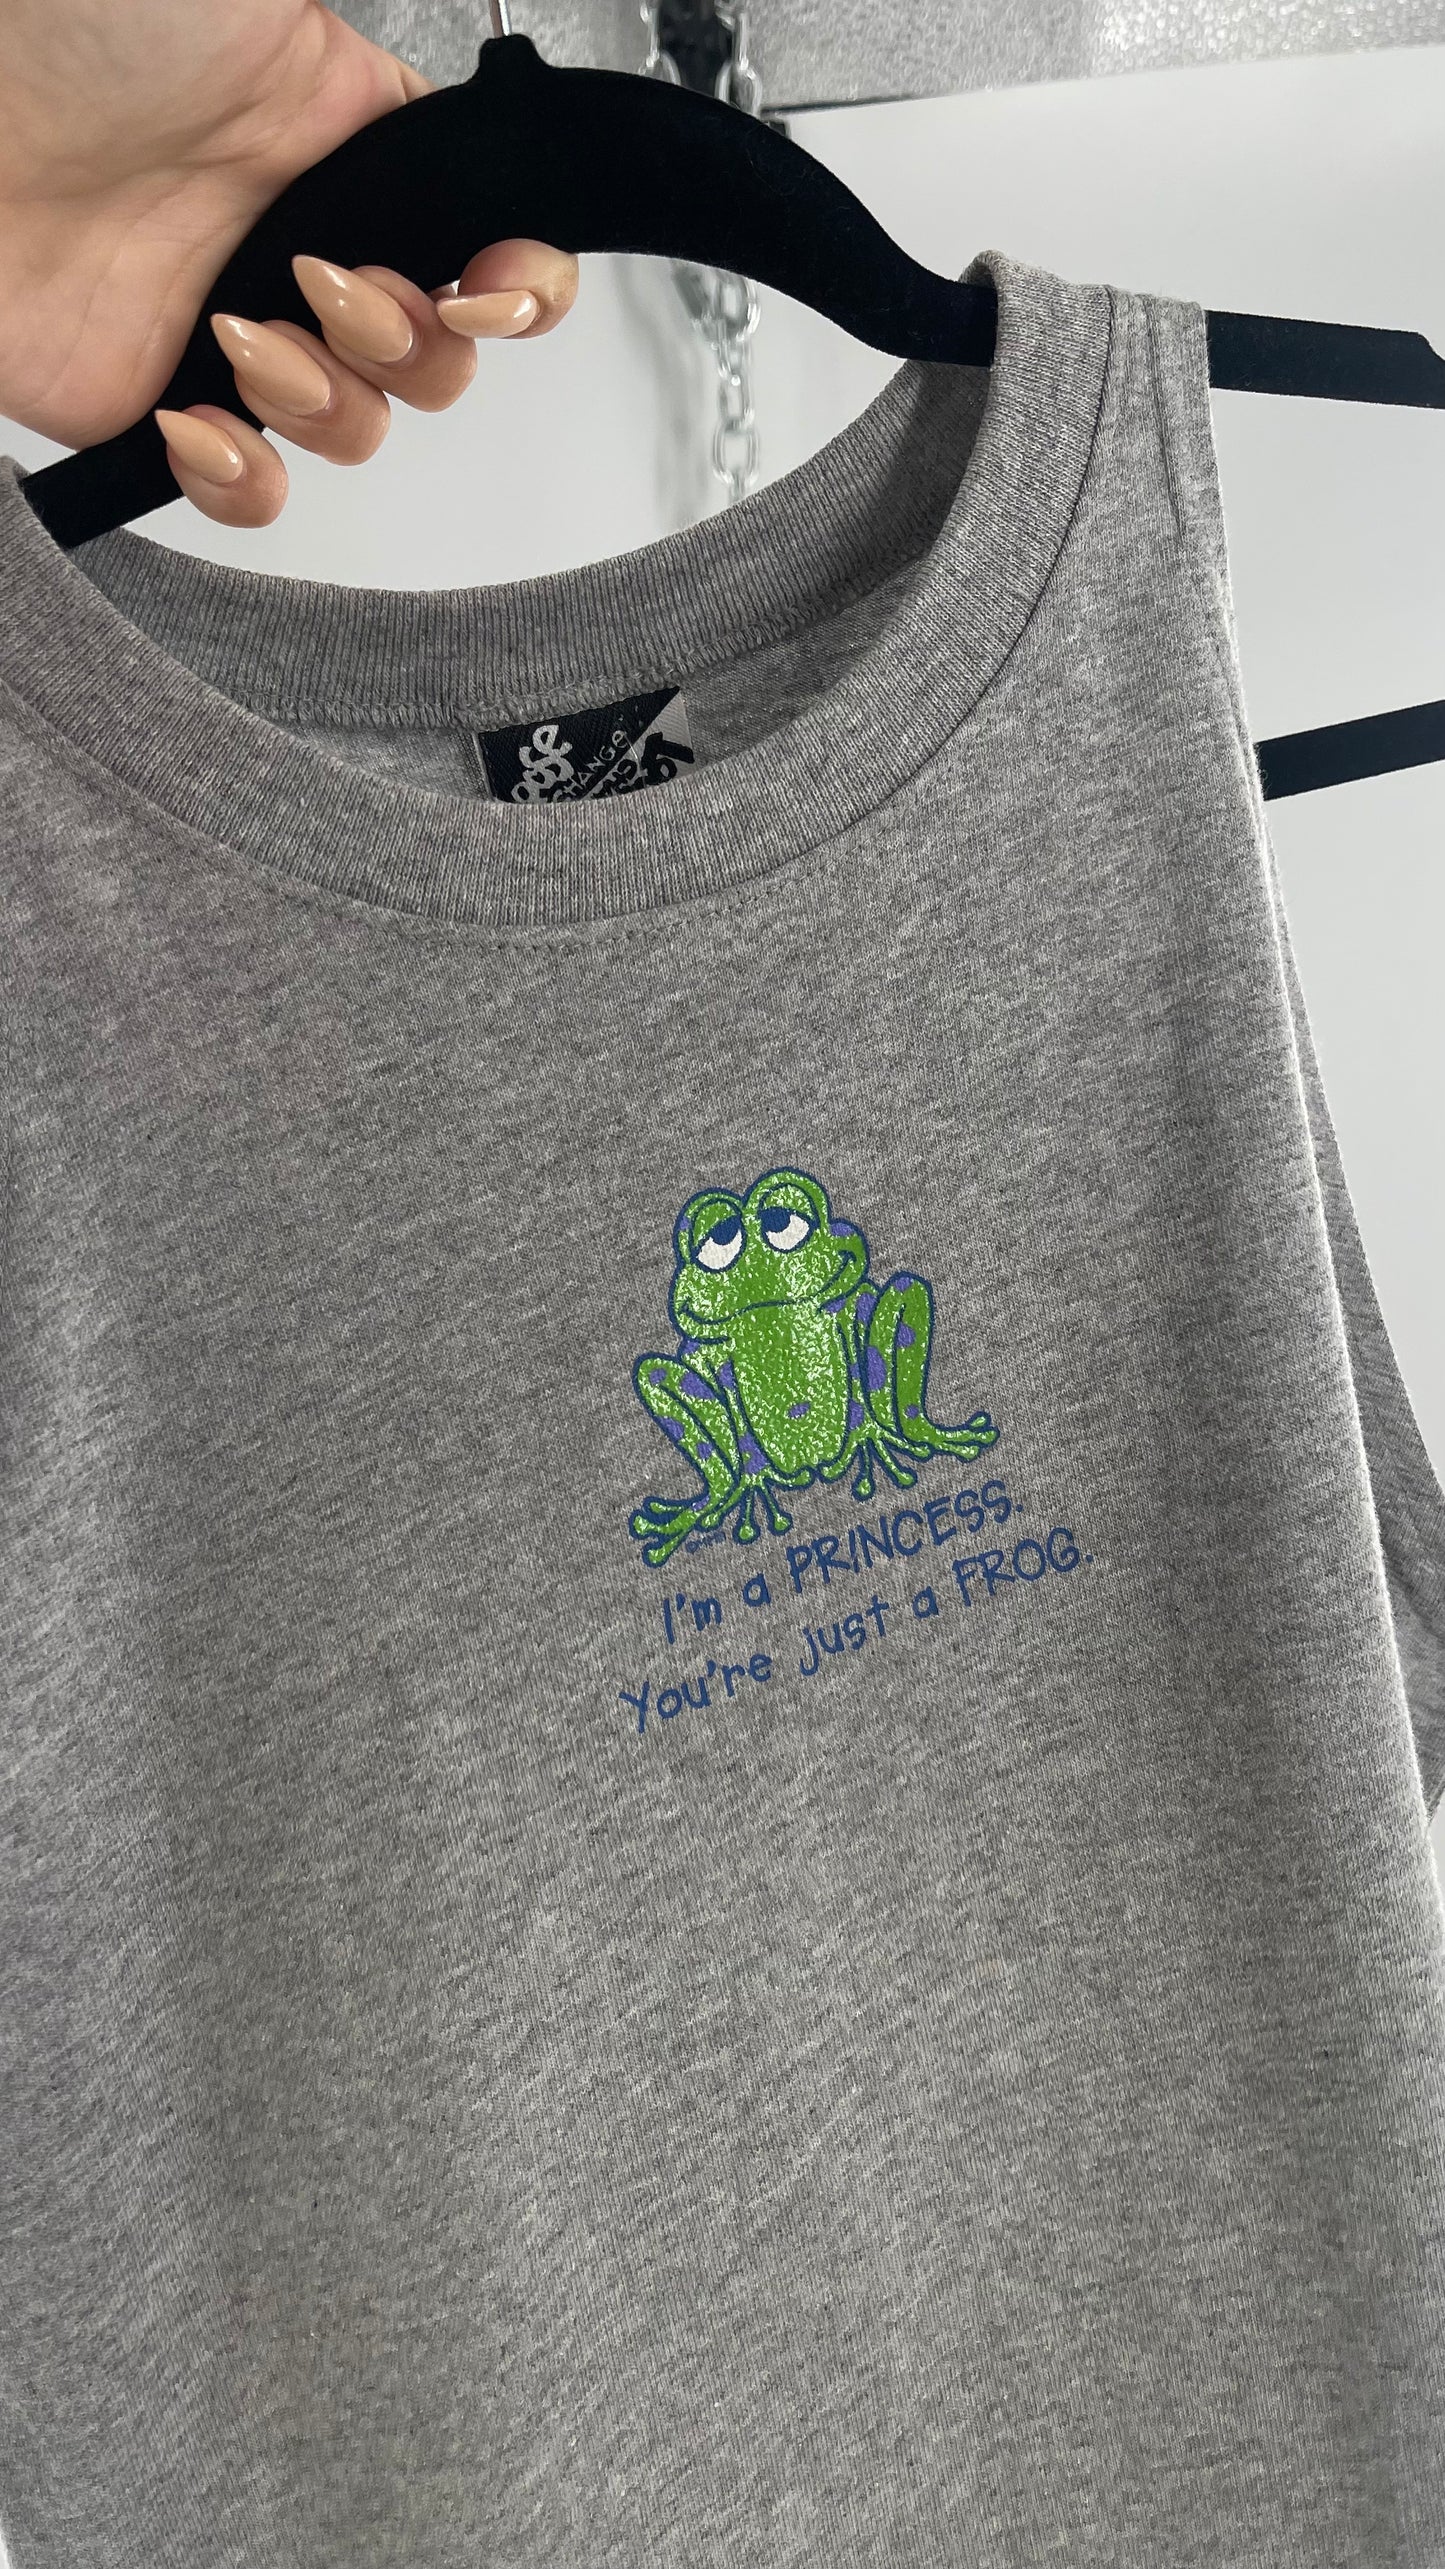 Deadstock Vintage Cropped Tank “I’m a Princess. You’re just a frog”